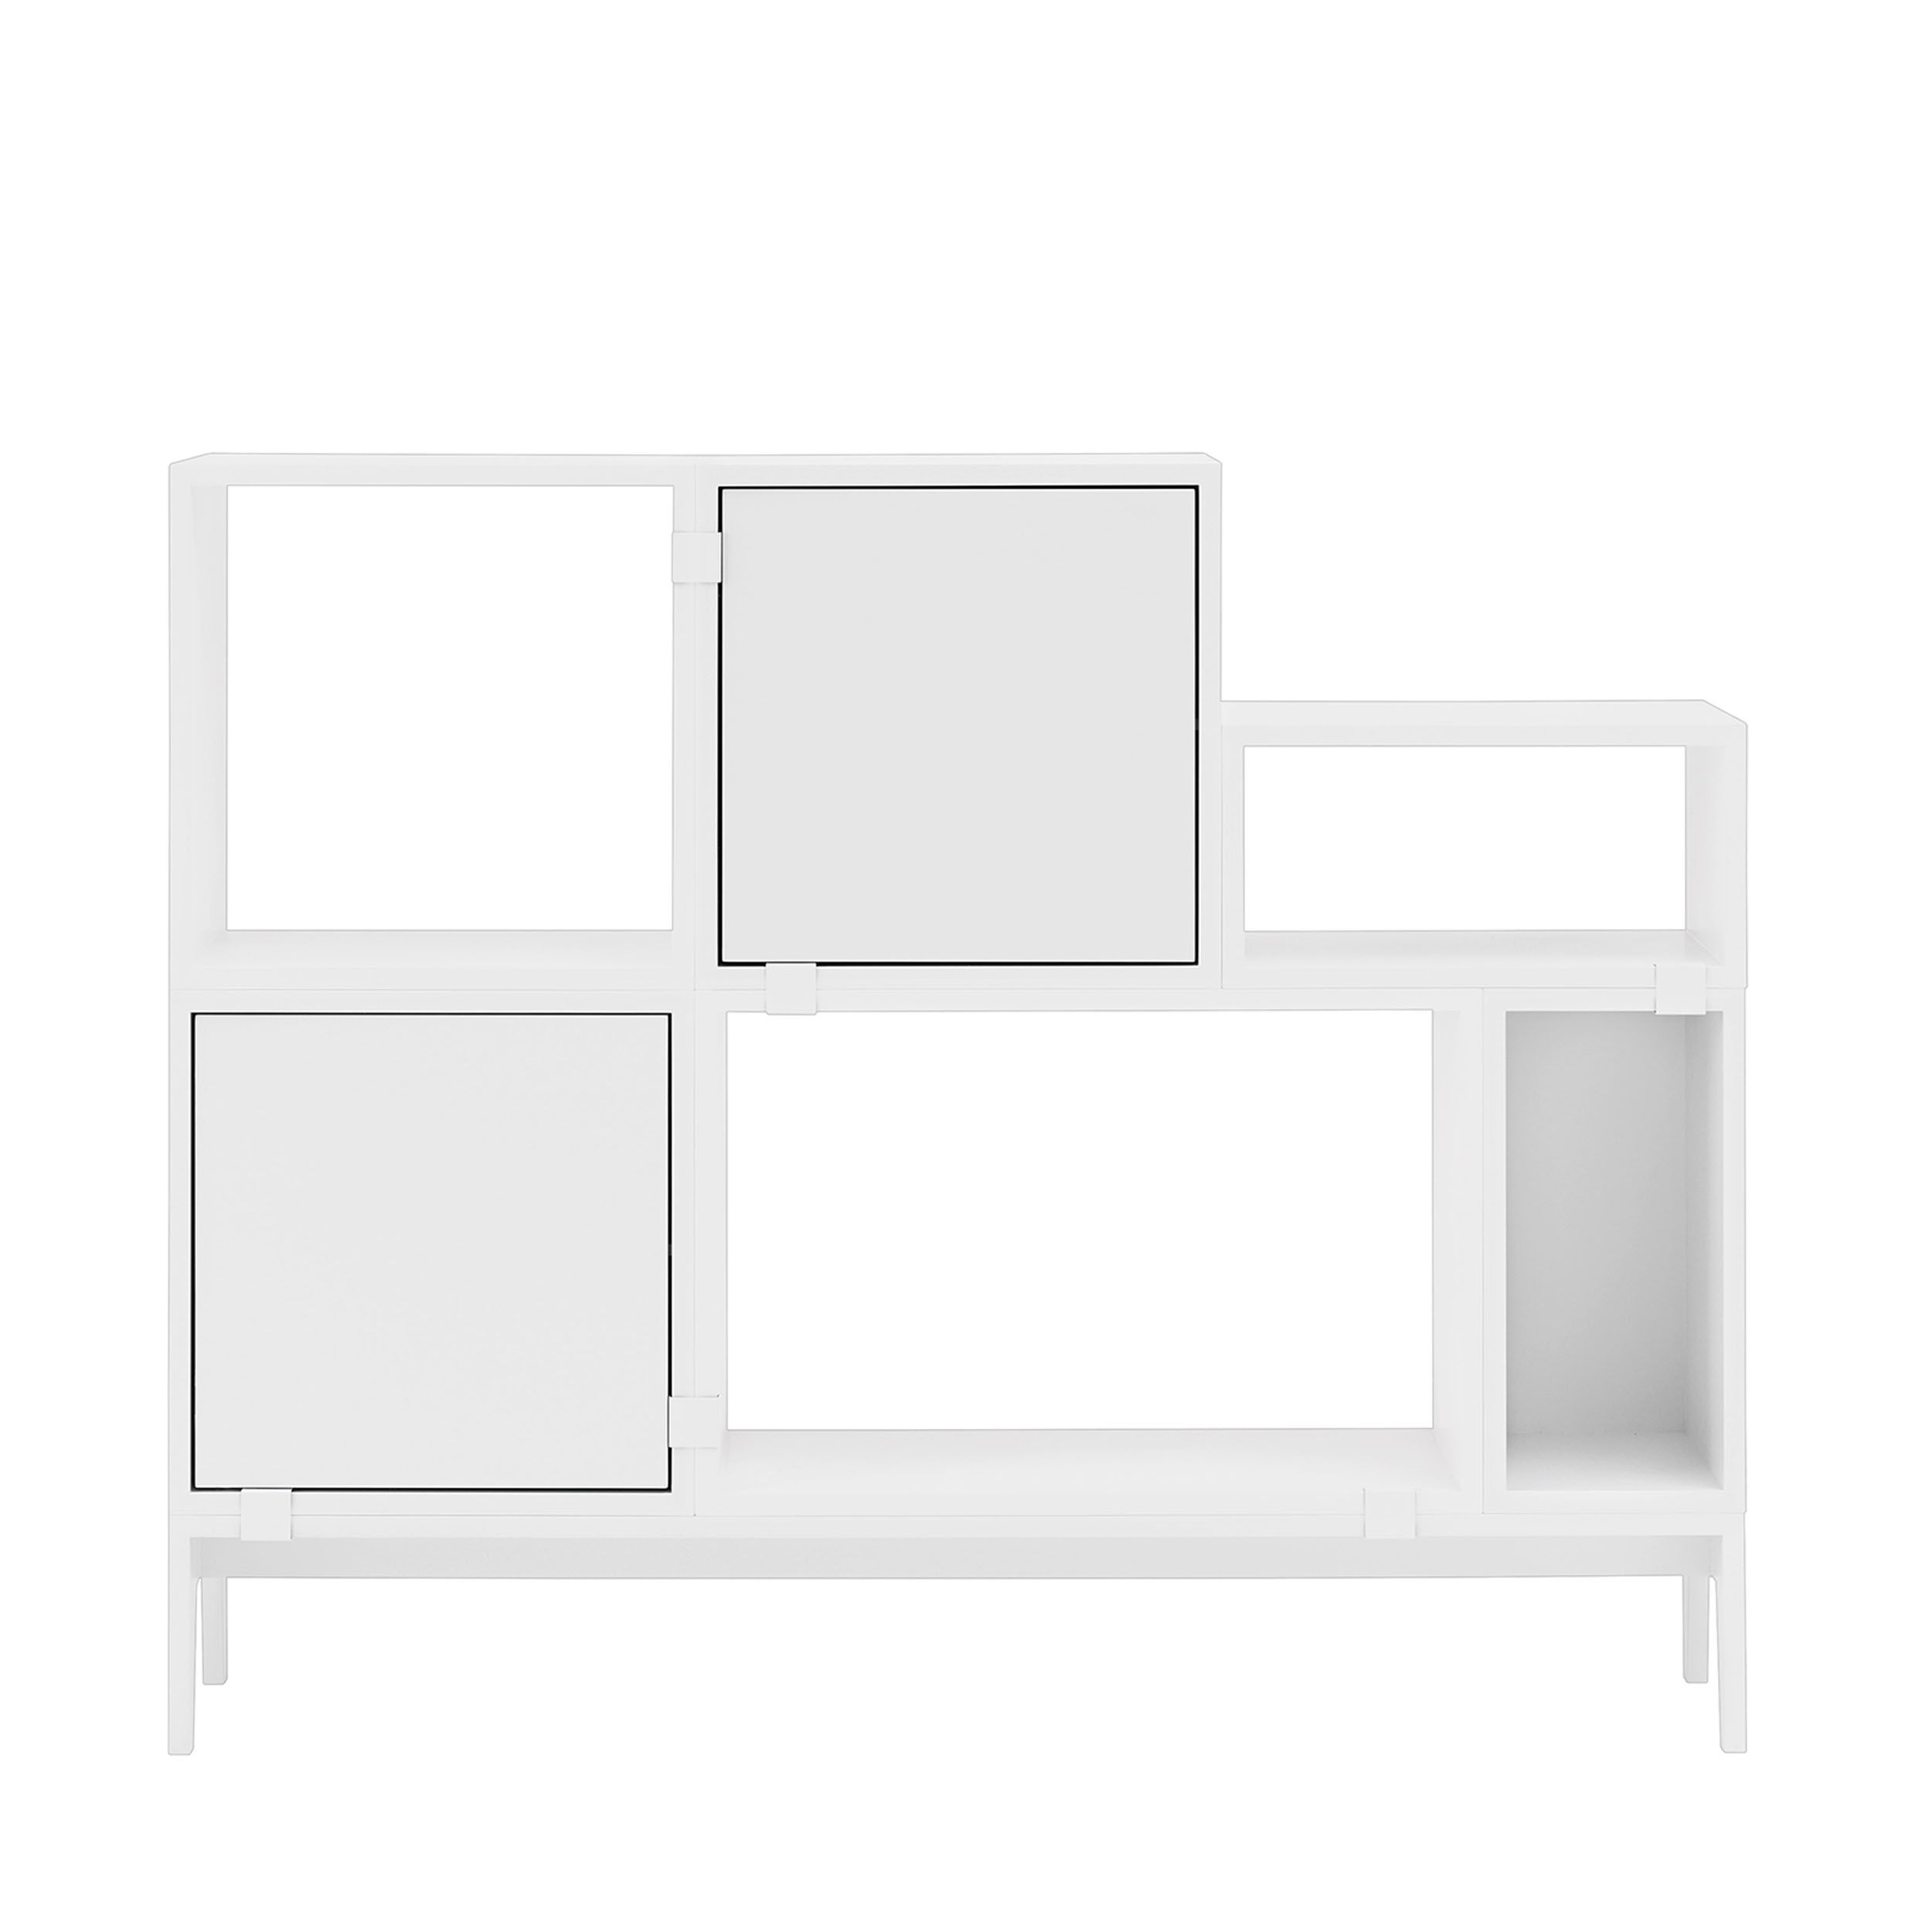 Stacked Sideboard Configuration 1 Version 1 Regal